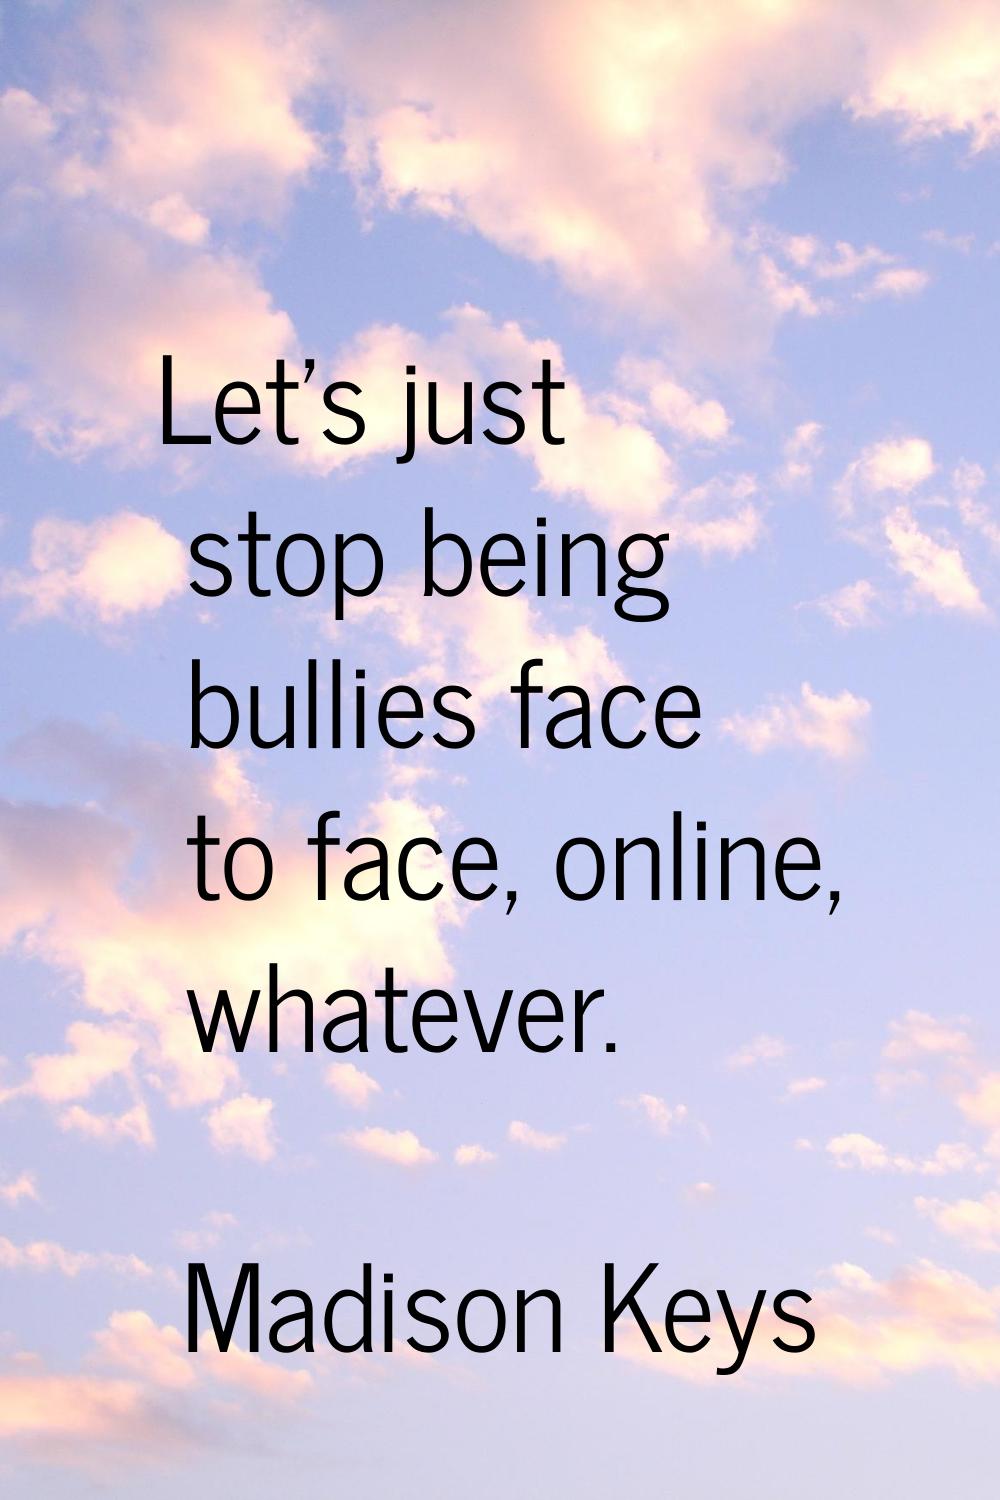 Let's just stop being bullies face to face, online, whatever.